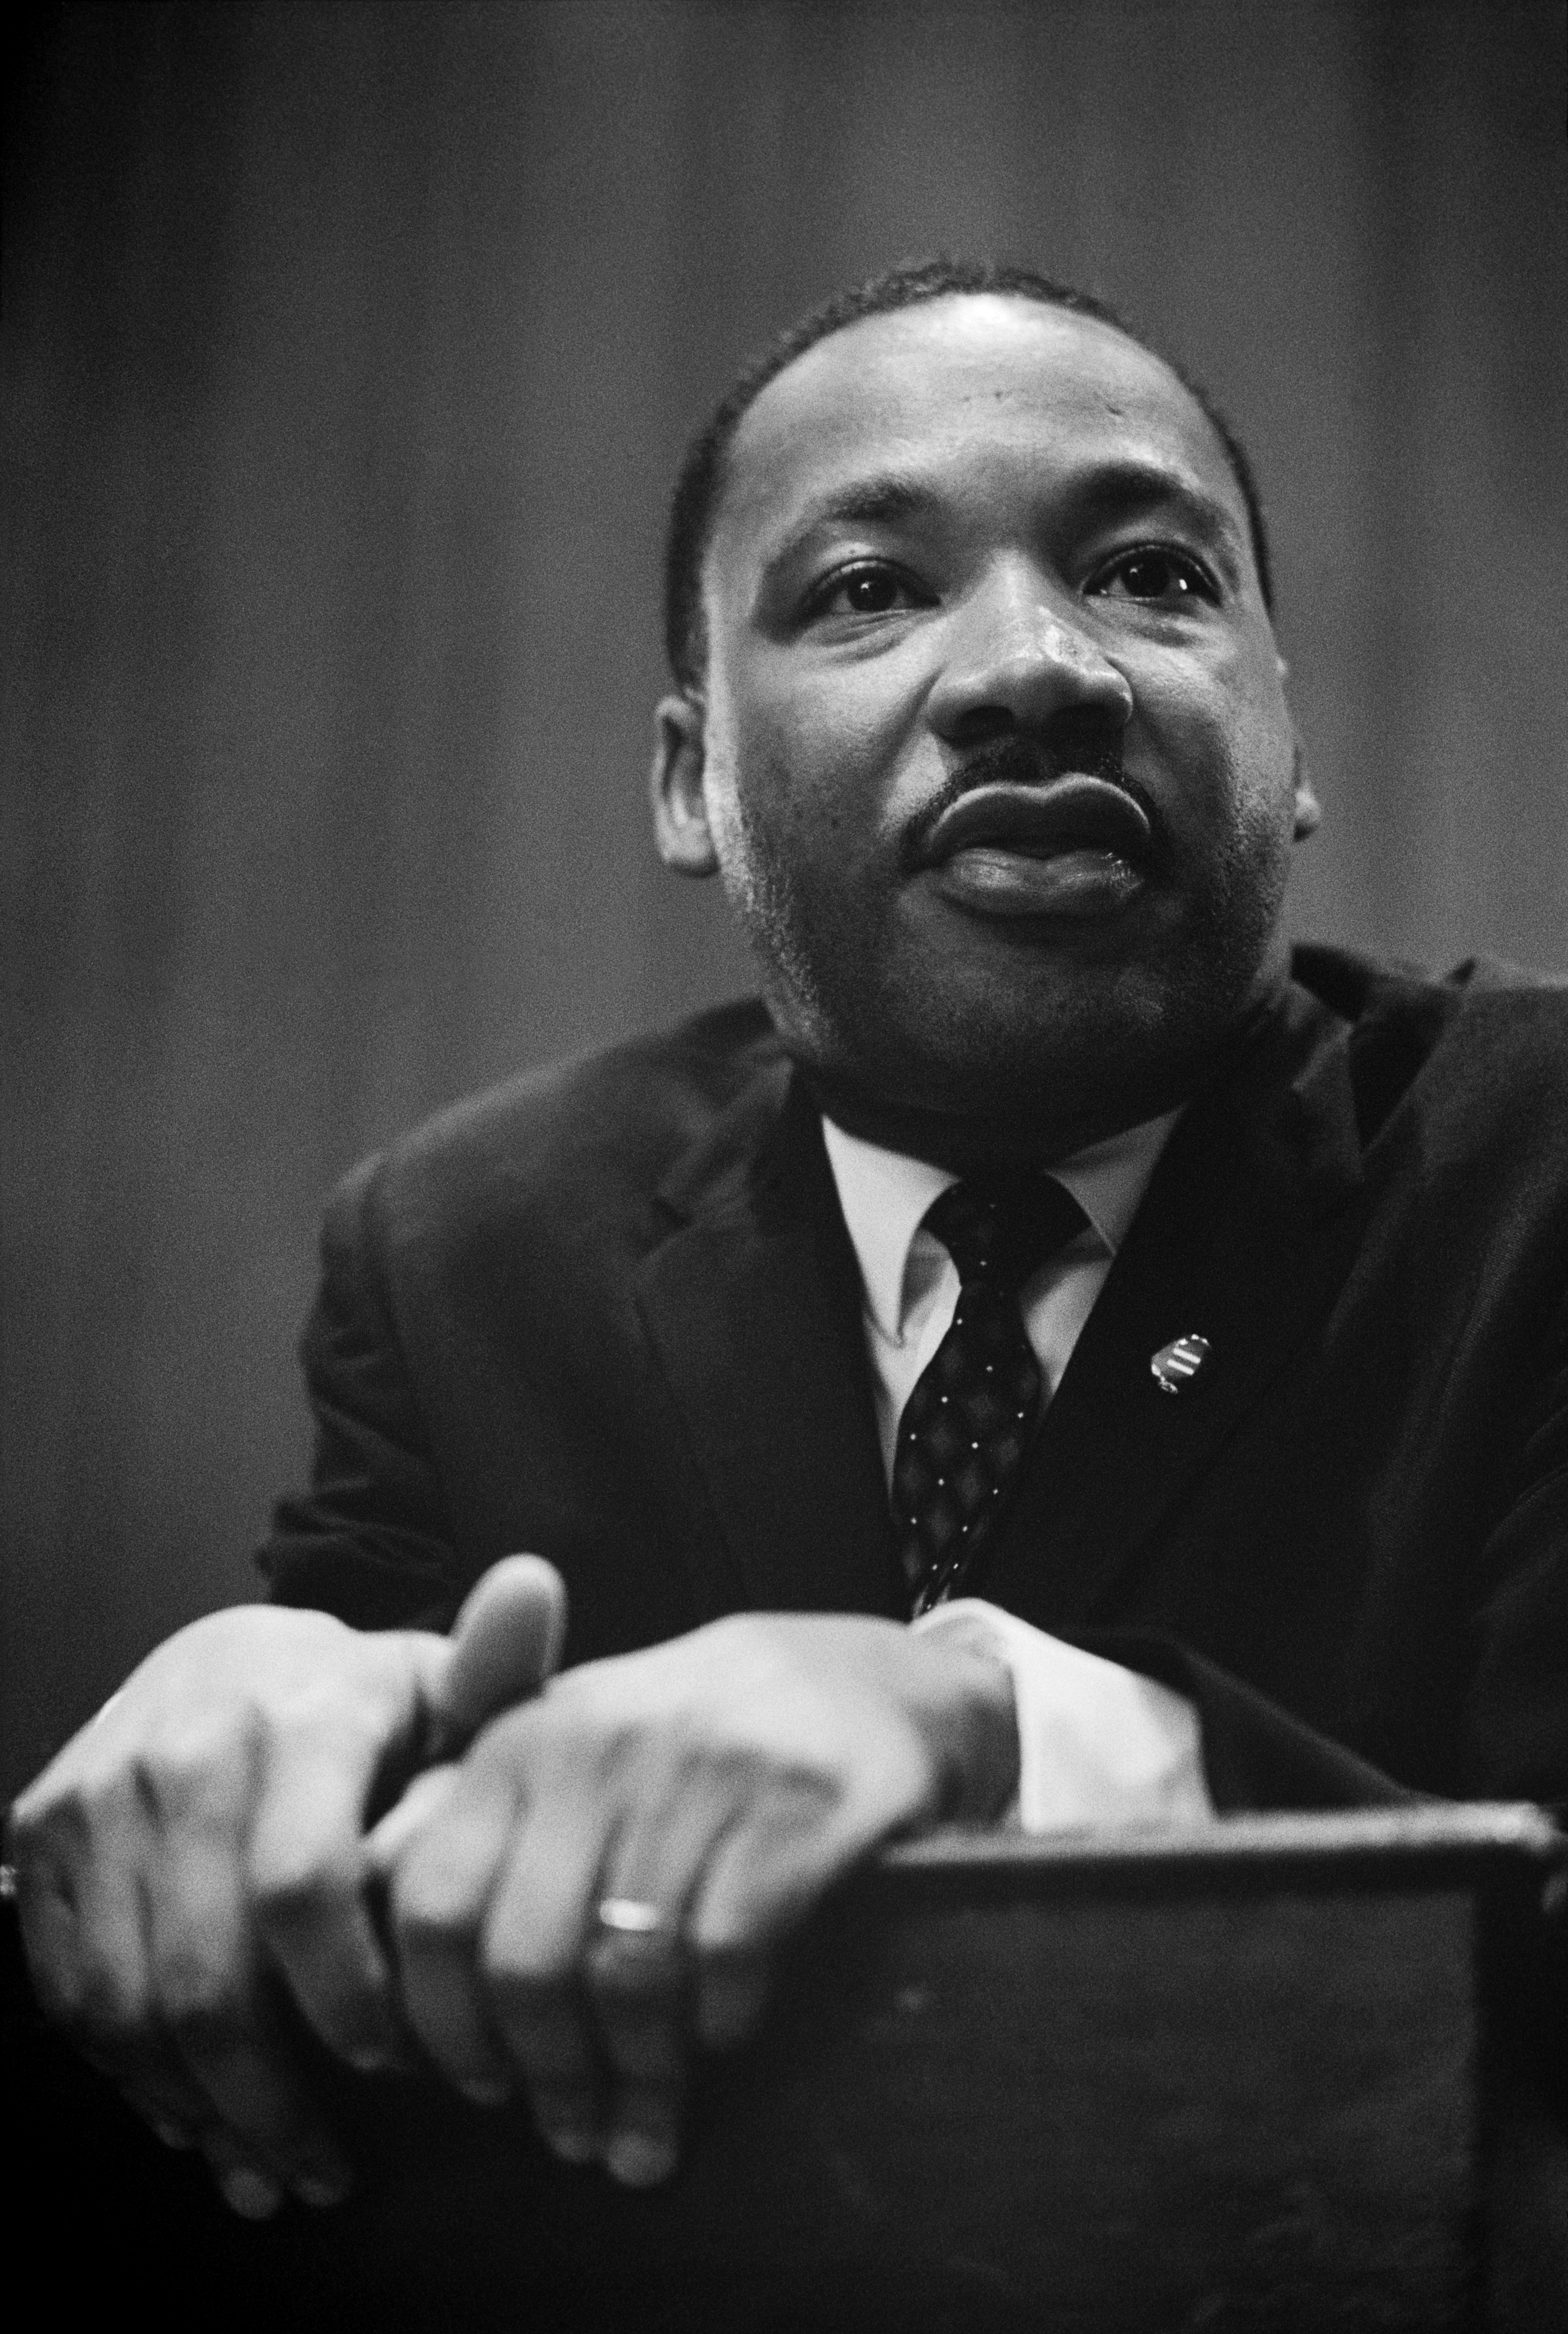 Rev. Dr. Martin Luther King leans over a podium in a black and white photo.